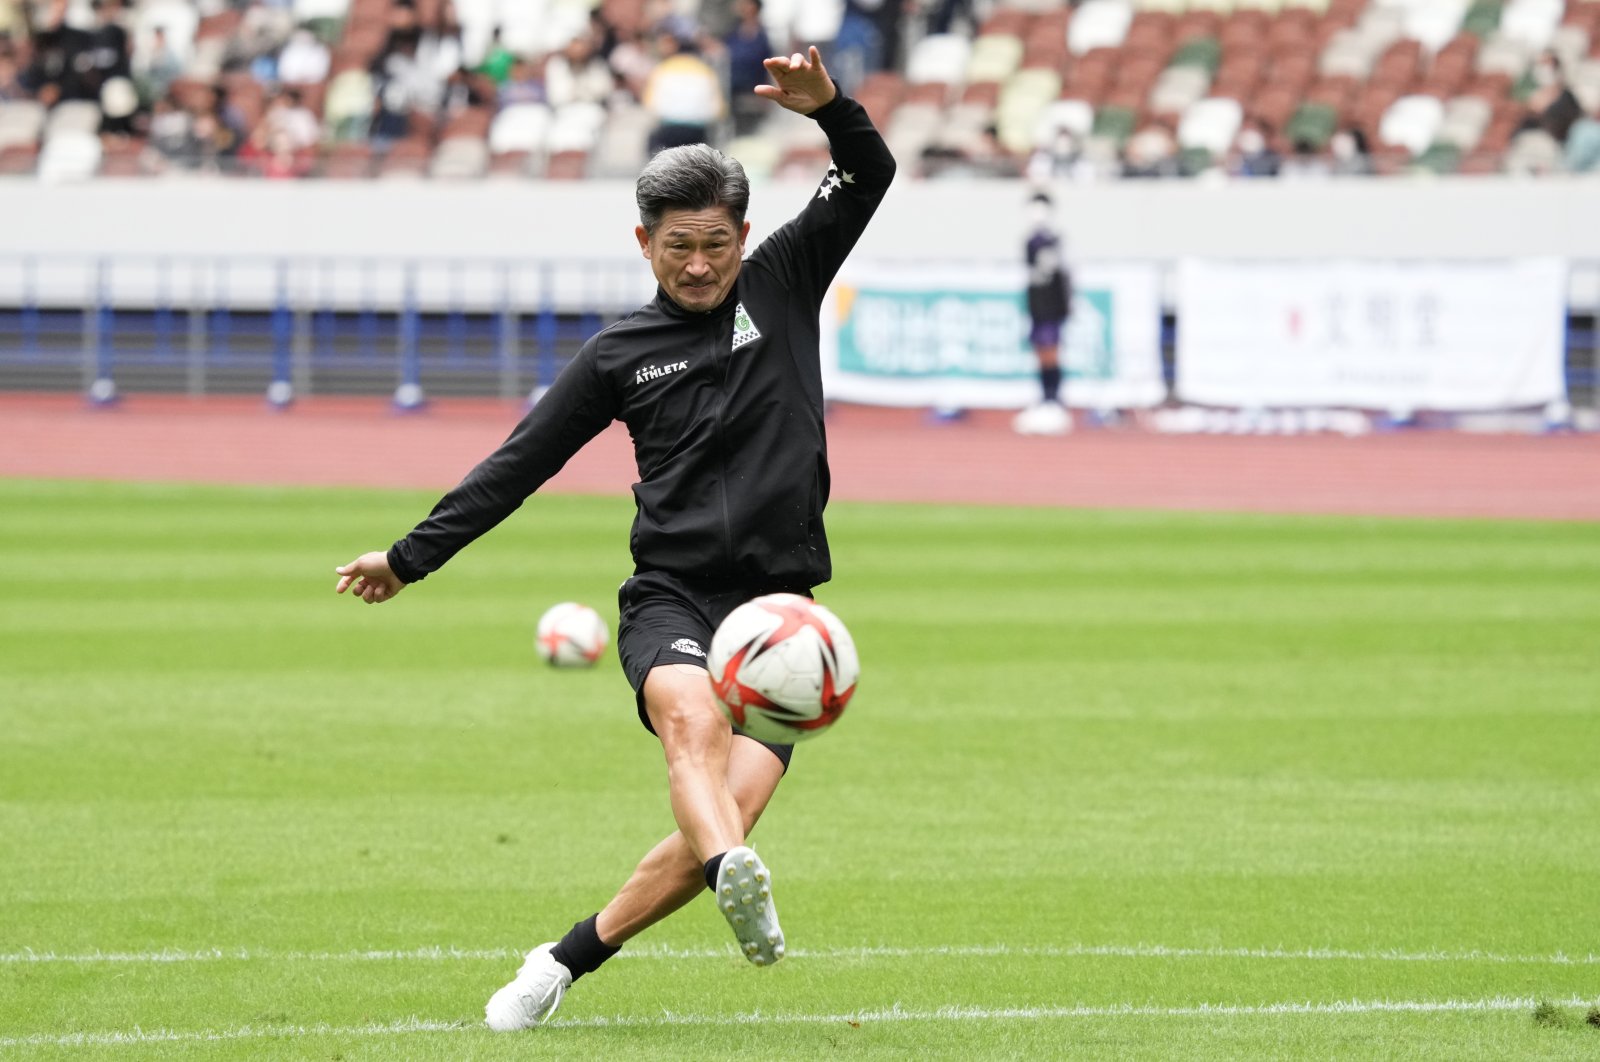 Former Suzuka Point Getters player Kazuyoshi Miura in action prior to the JFL match against Criacao Shinjuku at the National Stadium, Tokyo, Japan, Oct. 9, 2022. (Getty Images Photo)